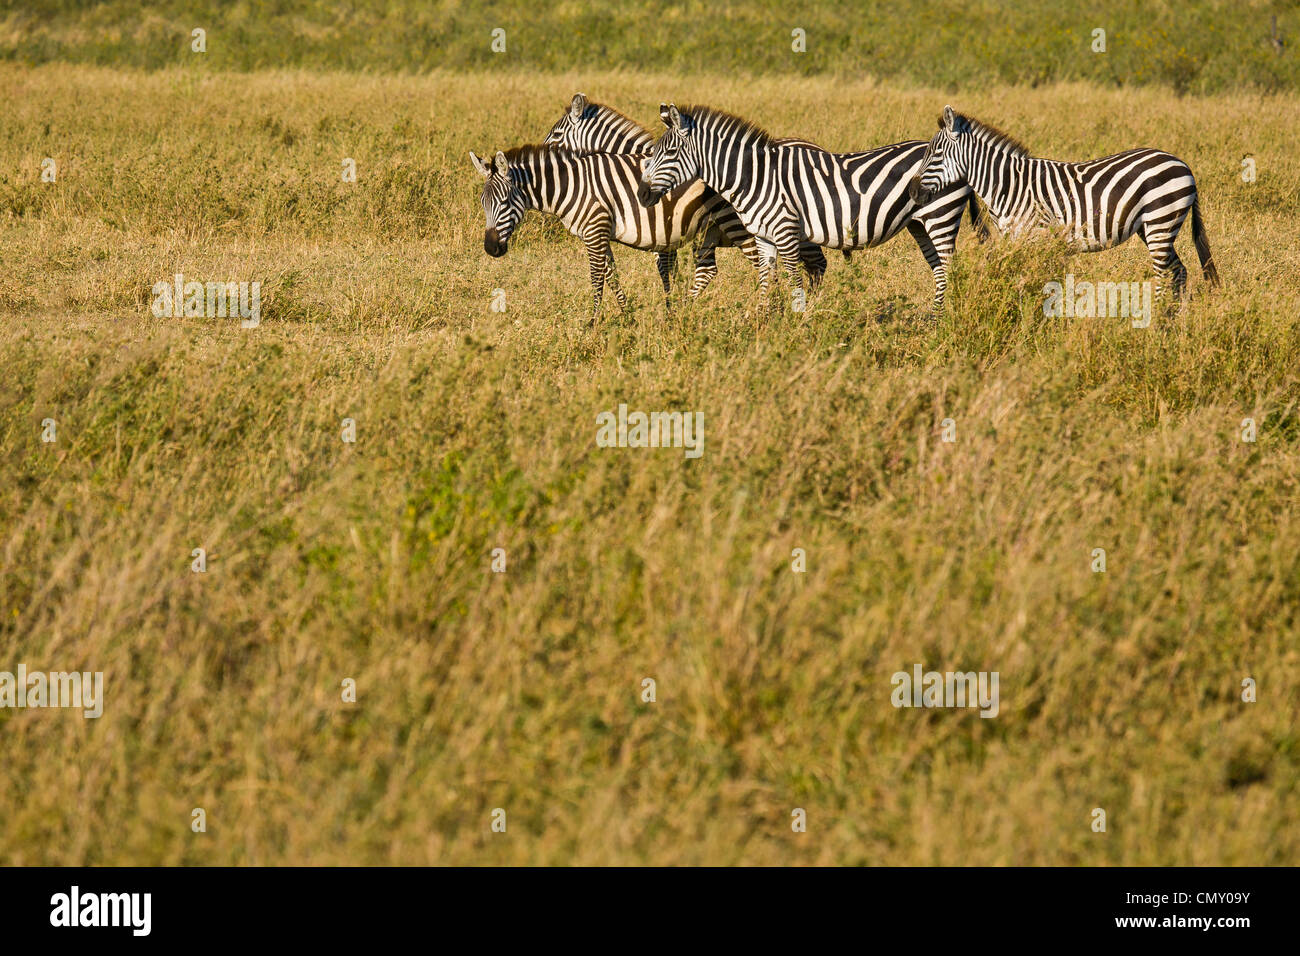 Small group of Zebra with grass foreground. Stock Photo